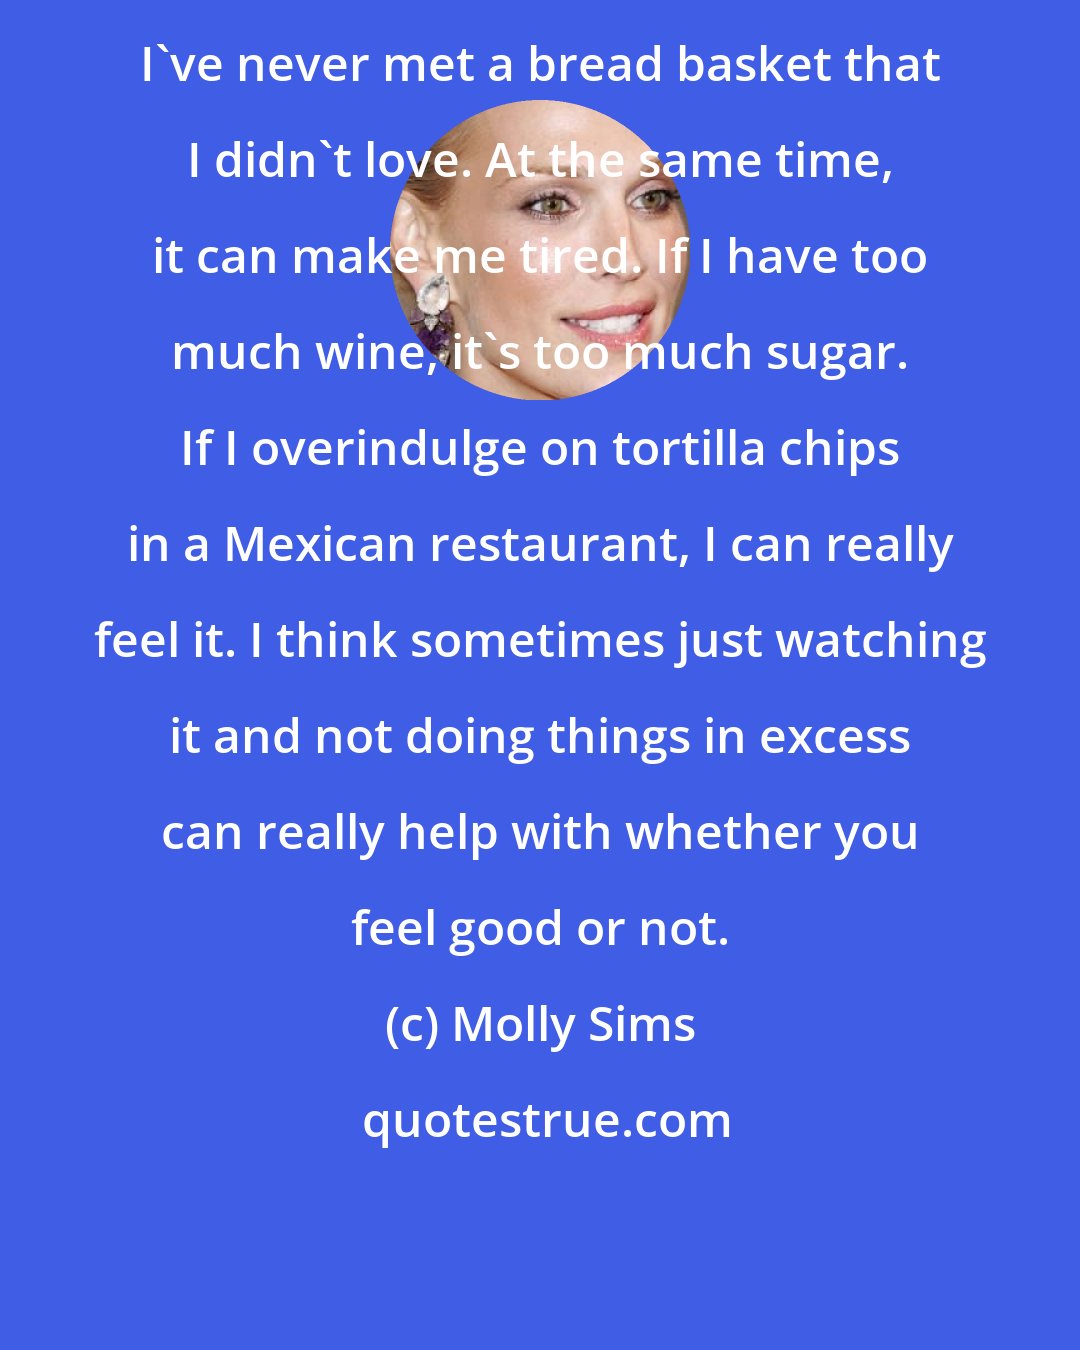 Molly Sims: I've never met a bread basket that I didn't love. At the same time, it can make me tired. If I have too much wine, it's too much sugar. If I overindulge on tortilla chips in a Mexican restaurant, I can really feel it. I think sometimes just watching it and not doing things in excess can really help with whether you feel good or not.